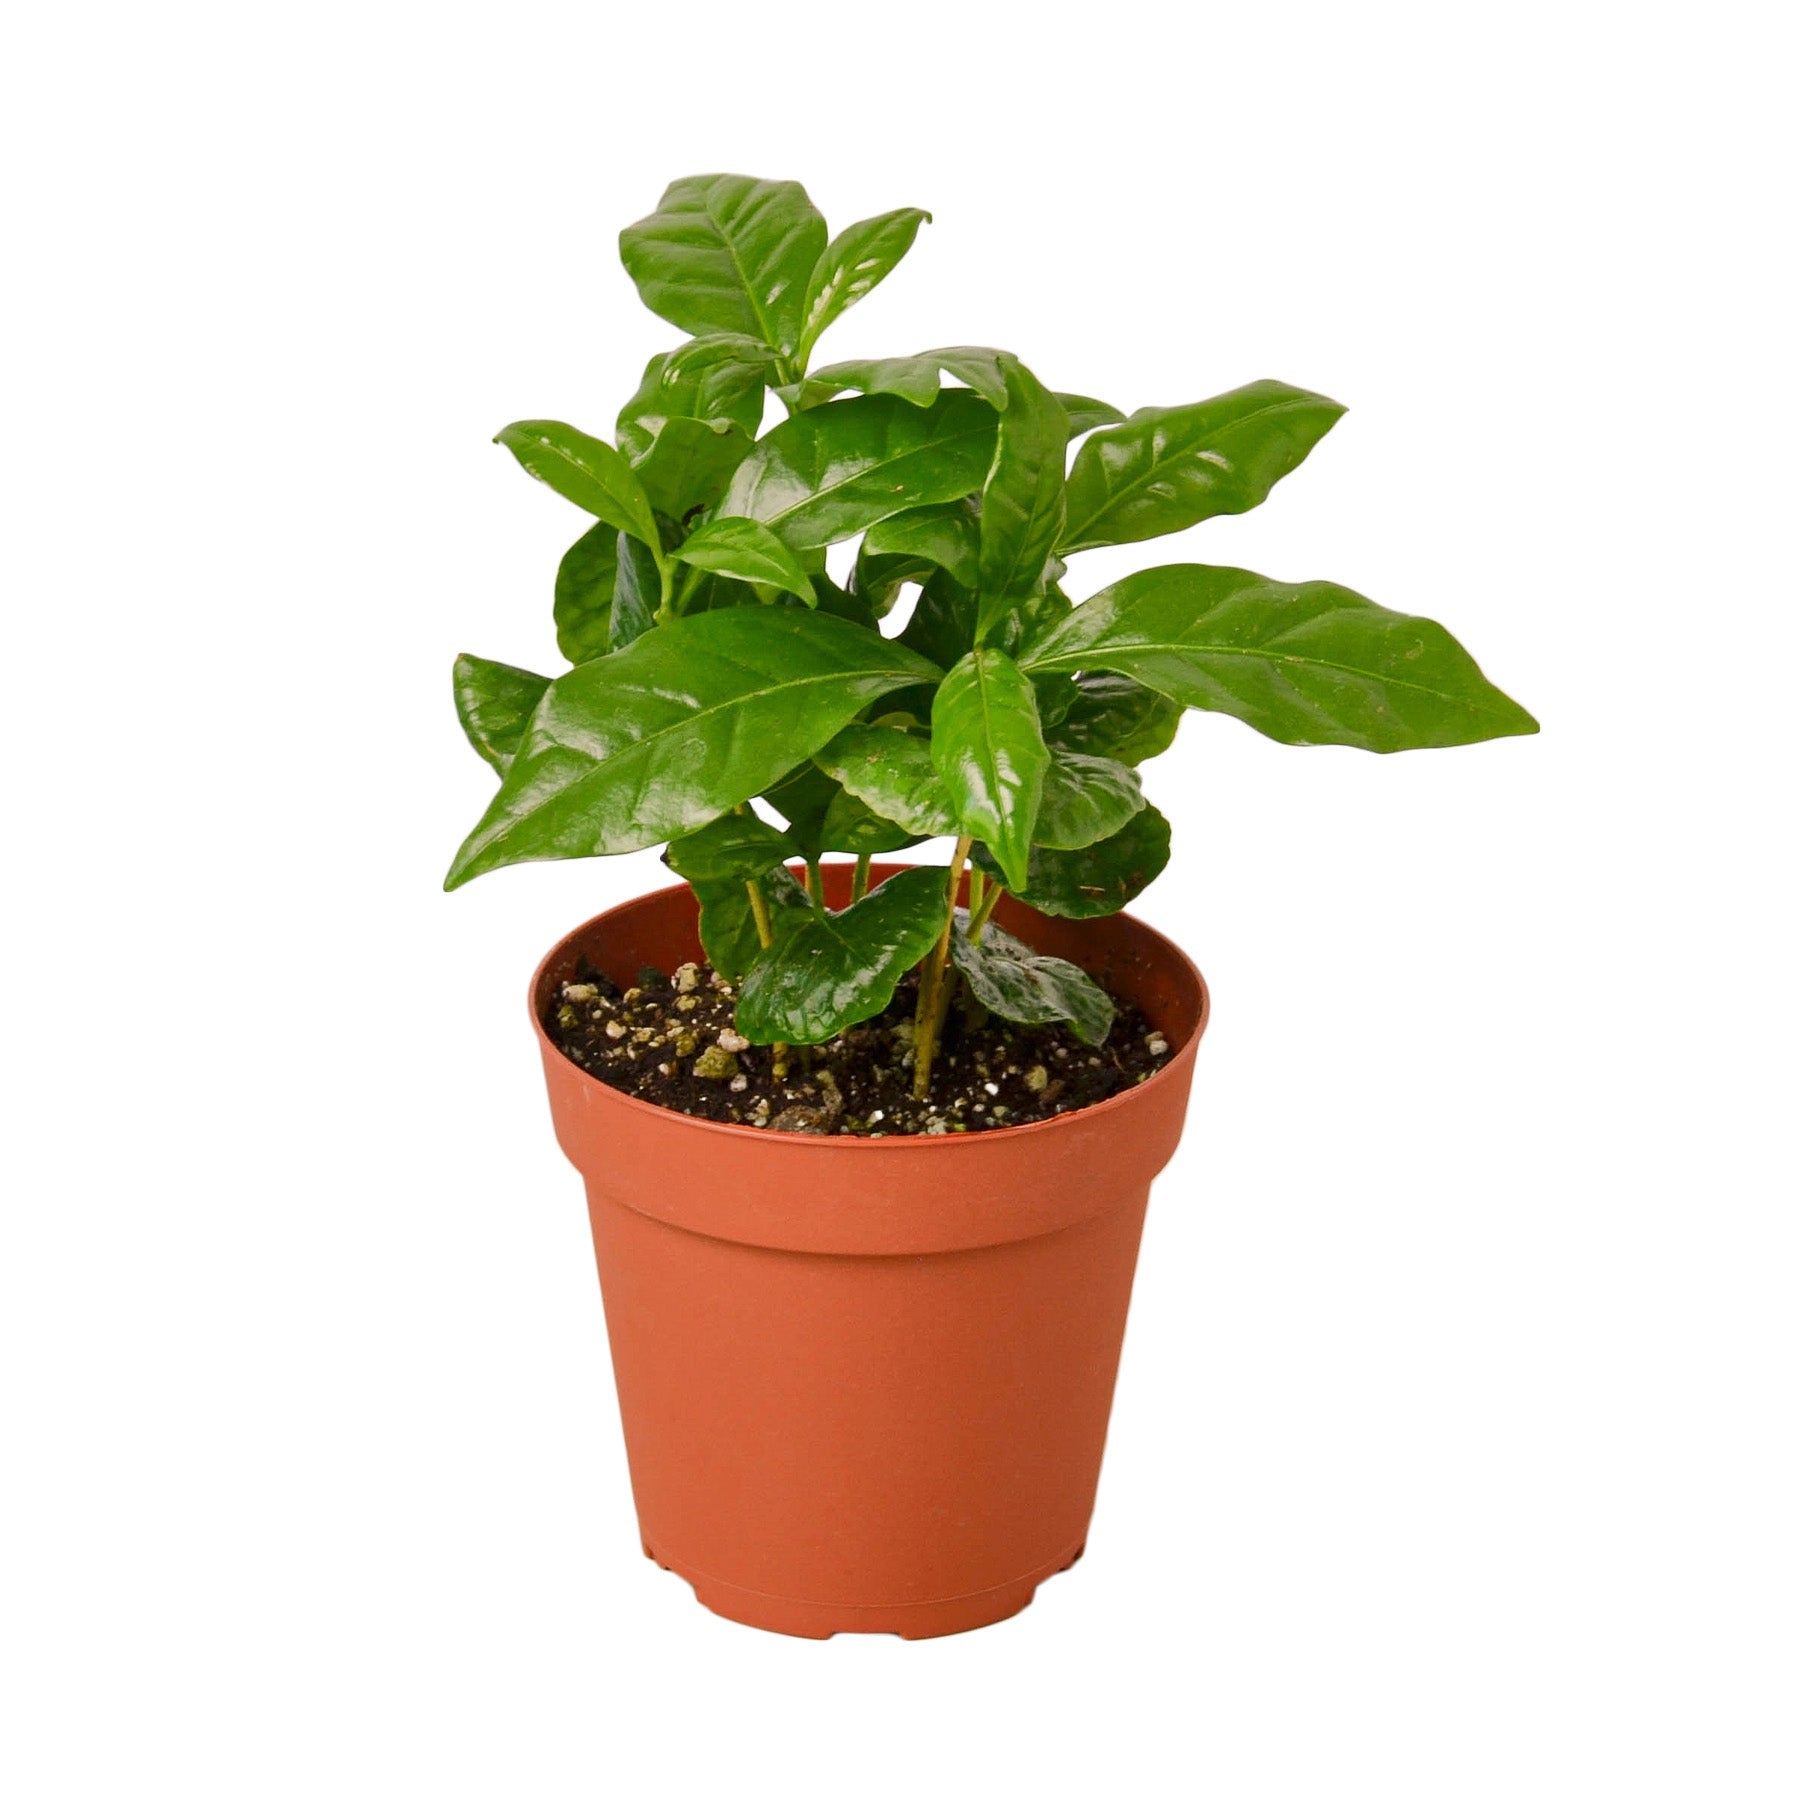 A coffee plant in a pot on a white background sourced from one of the top plant nurseries near me.